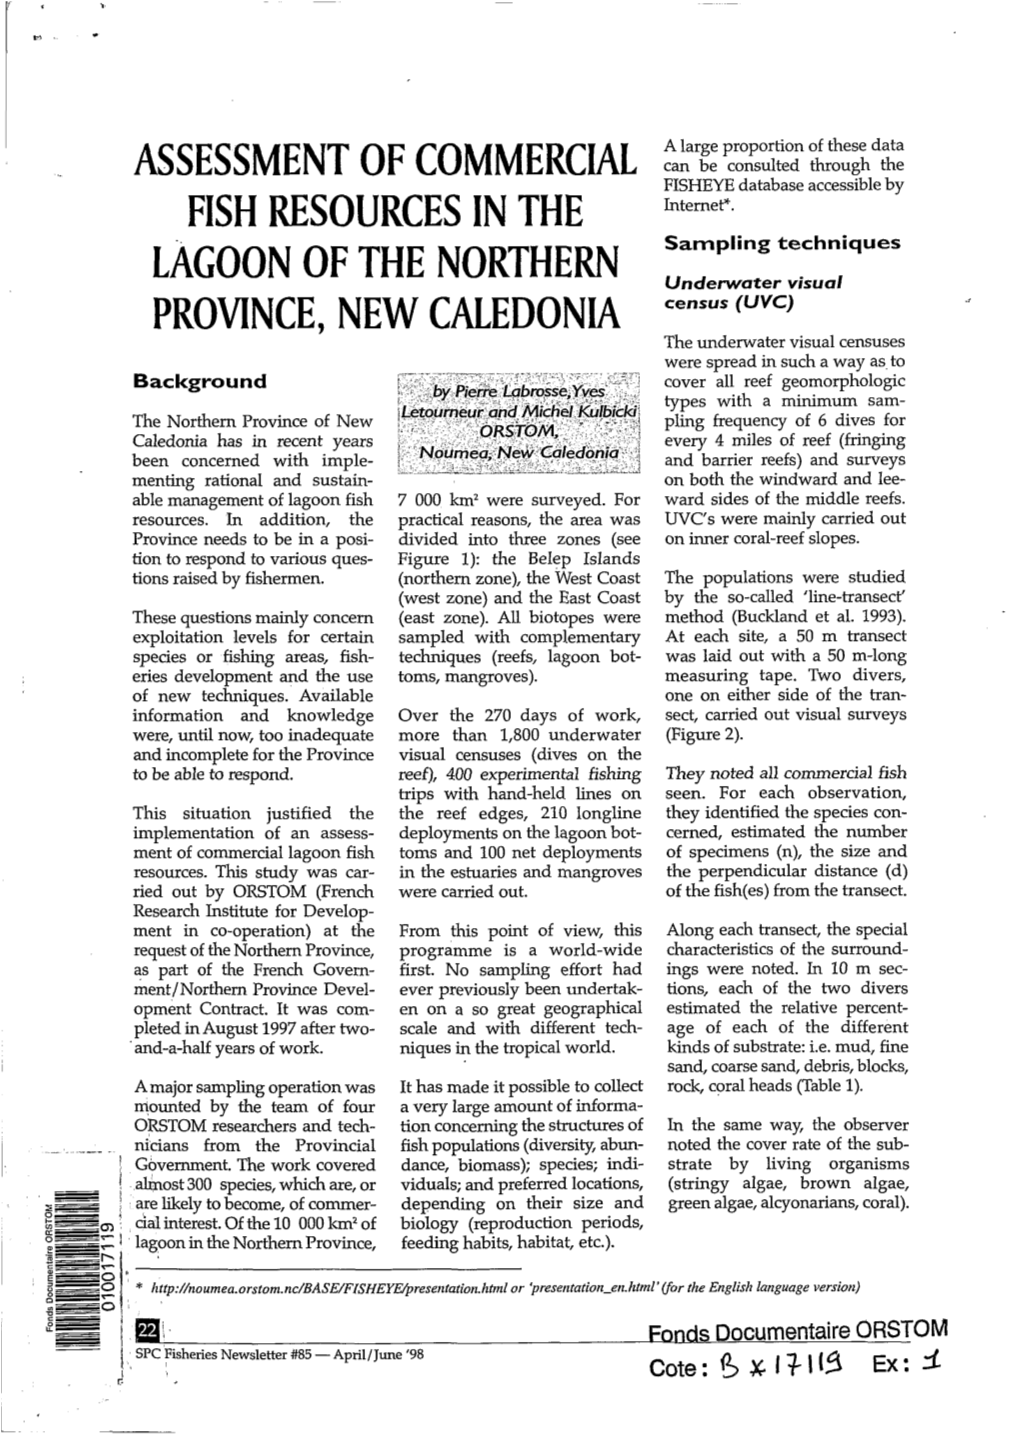 Assessment of Commercial Fish Resources in the Lagoon of the Northern Province